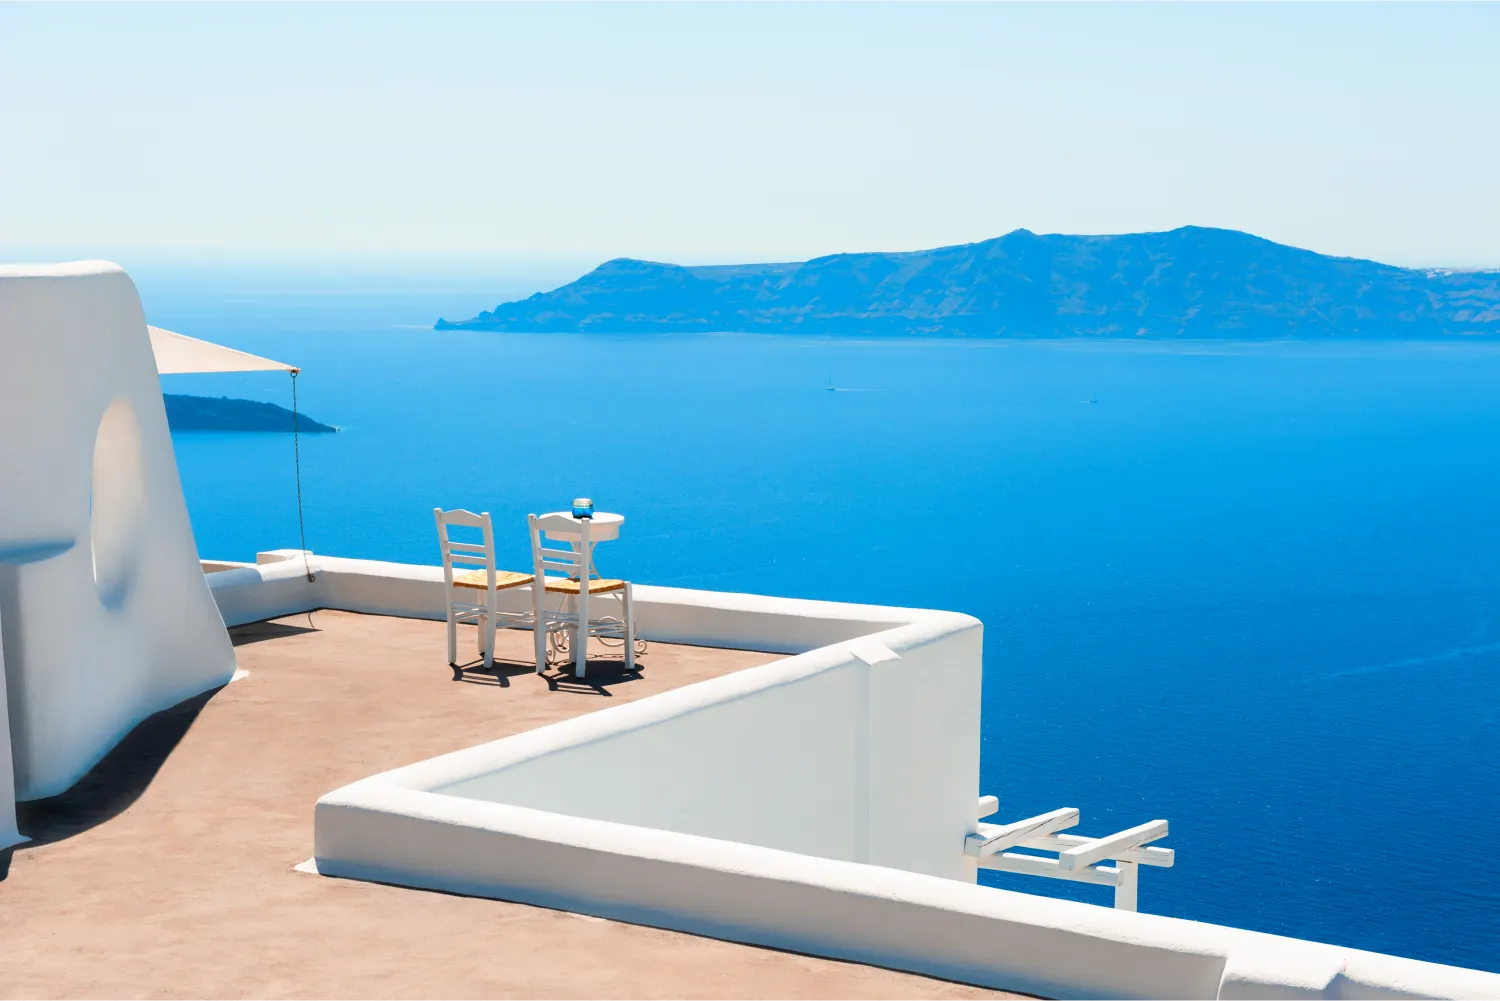 Various Two Chairs On The Terrace With Sea View White Architecture On Santorini Island Greece image